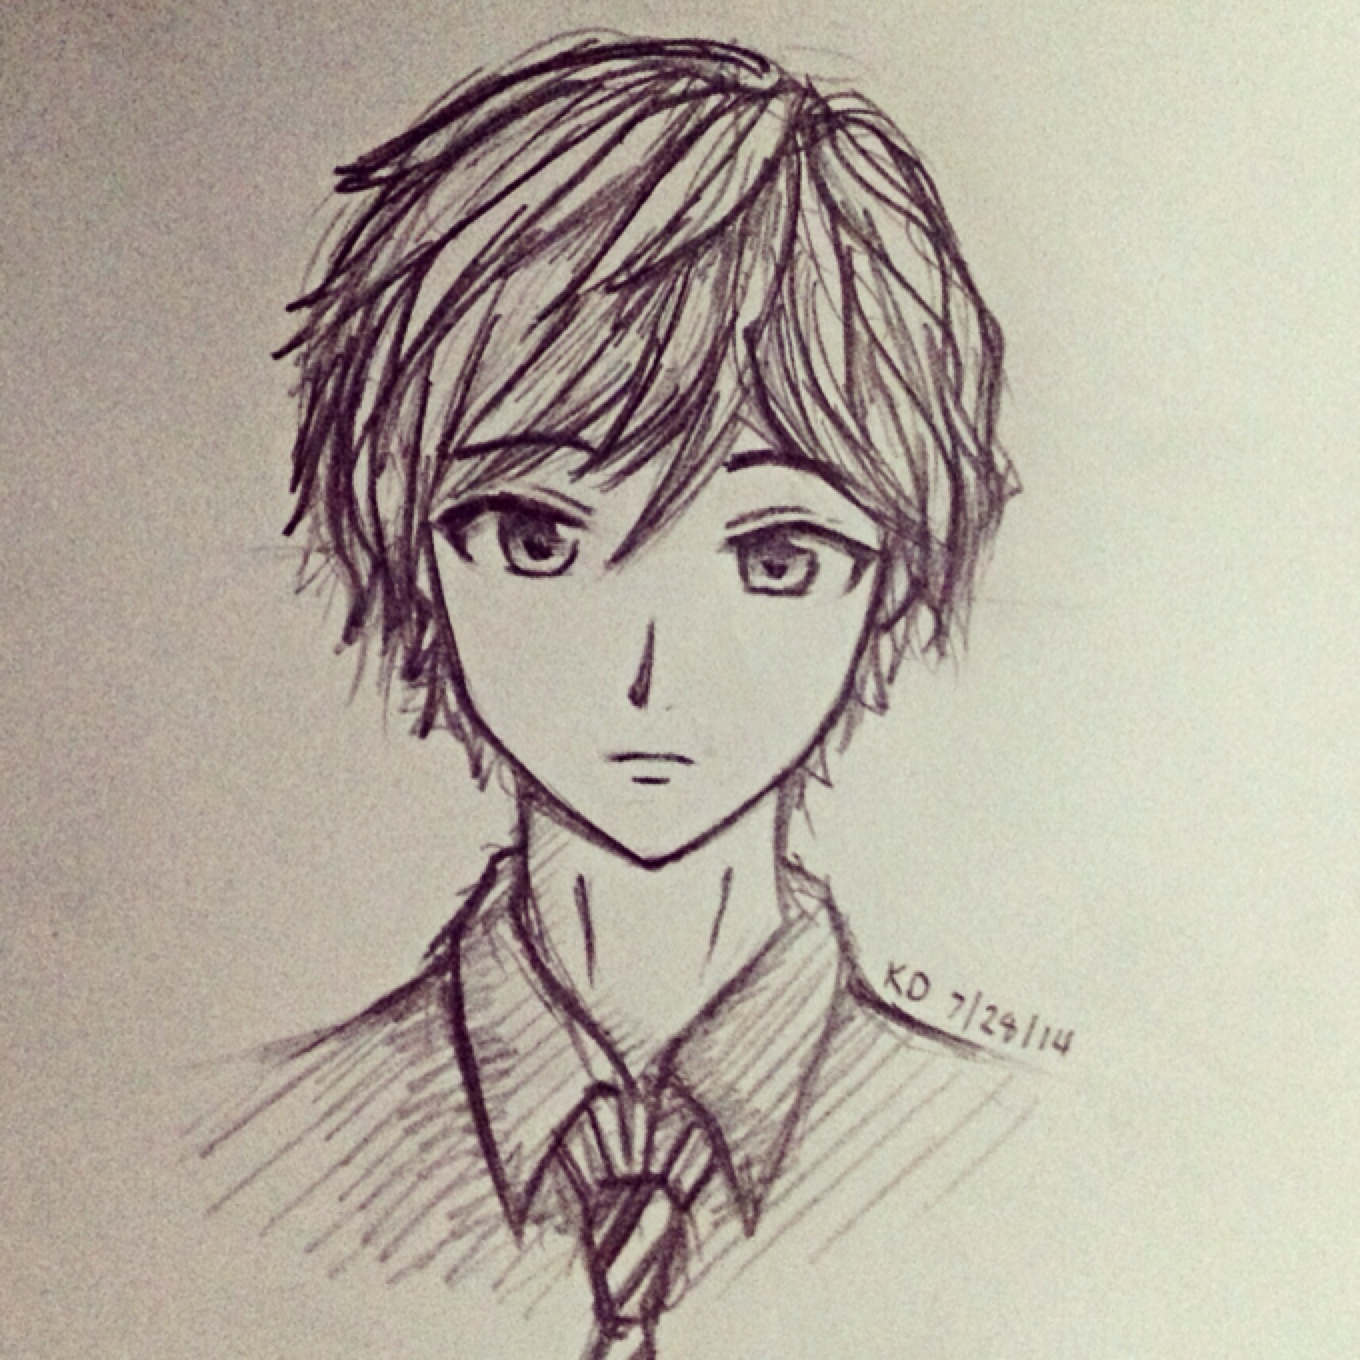 Anime Boy Sketch At Paintingvalley Com Explore Collection Of Anime Boy Sketch